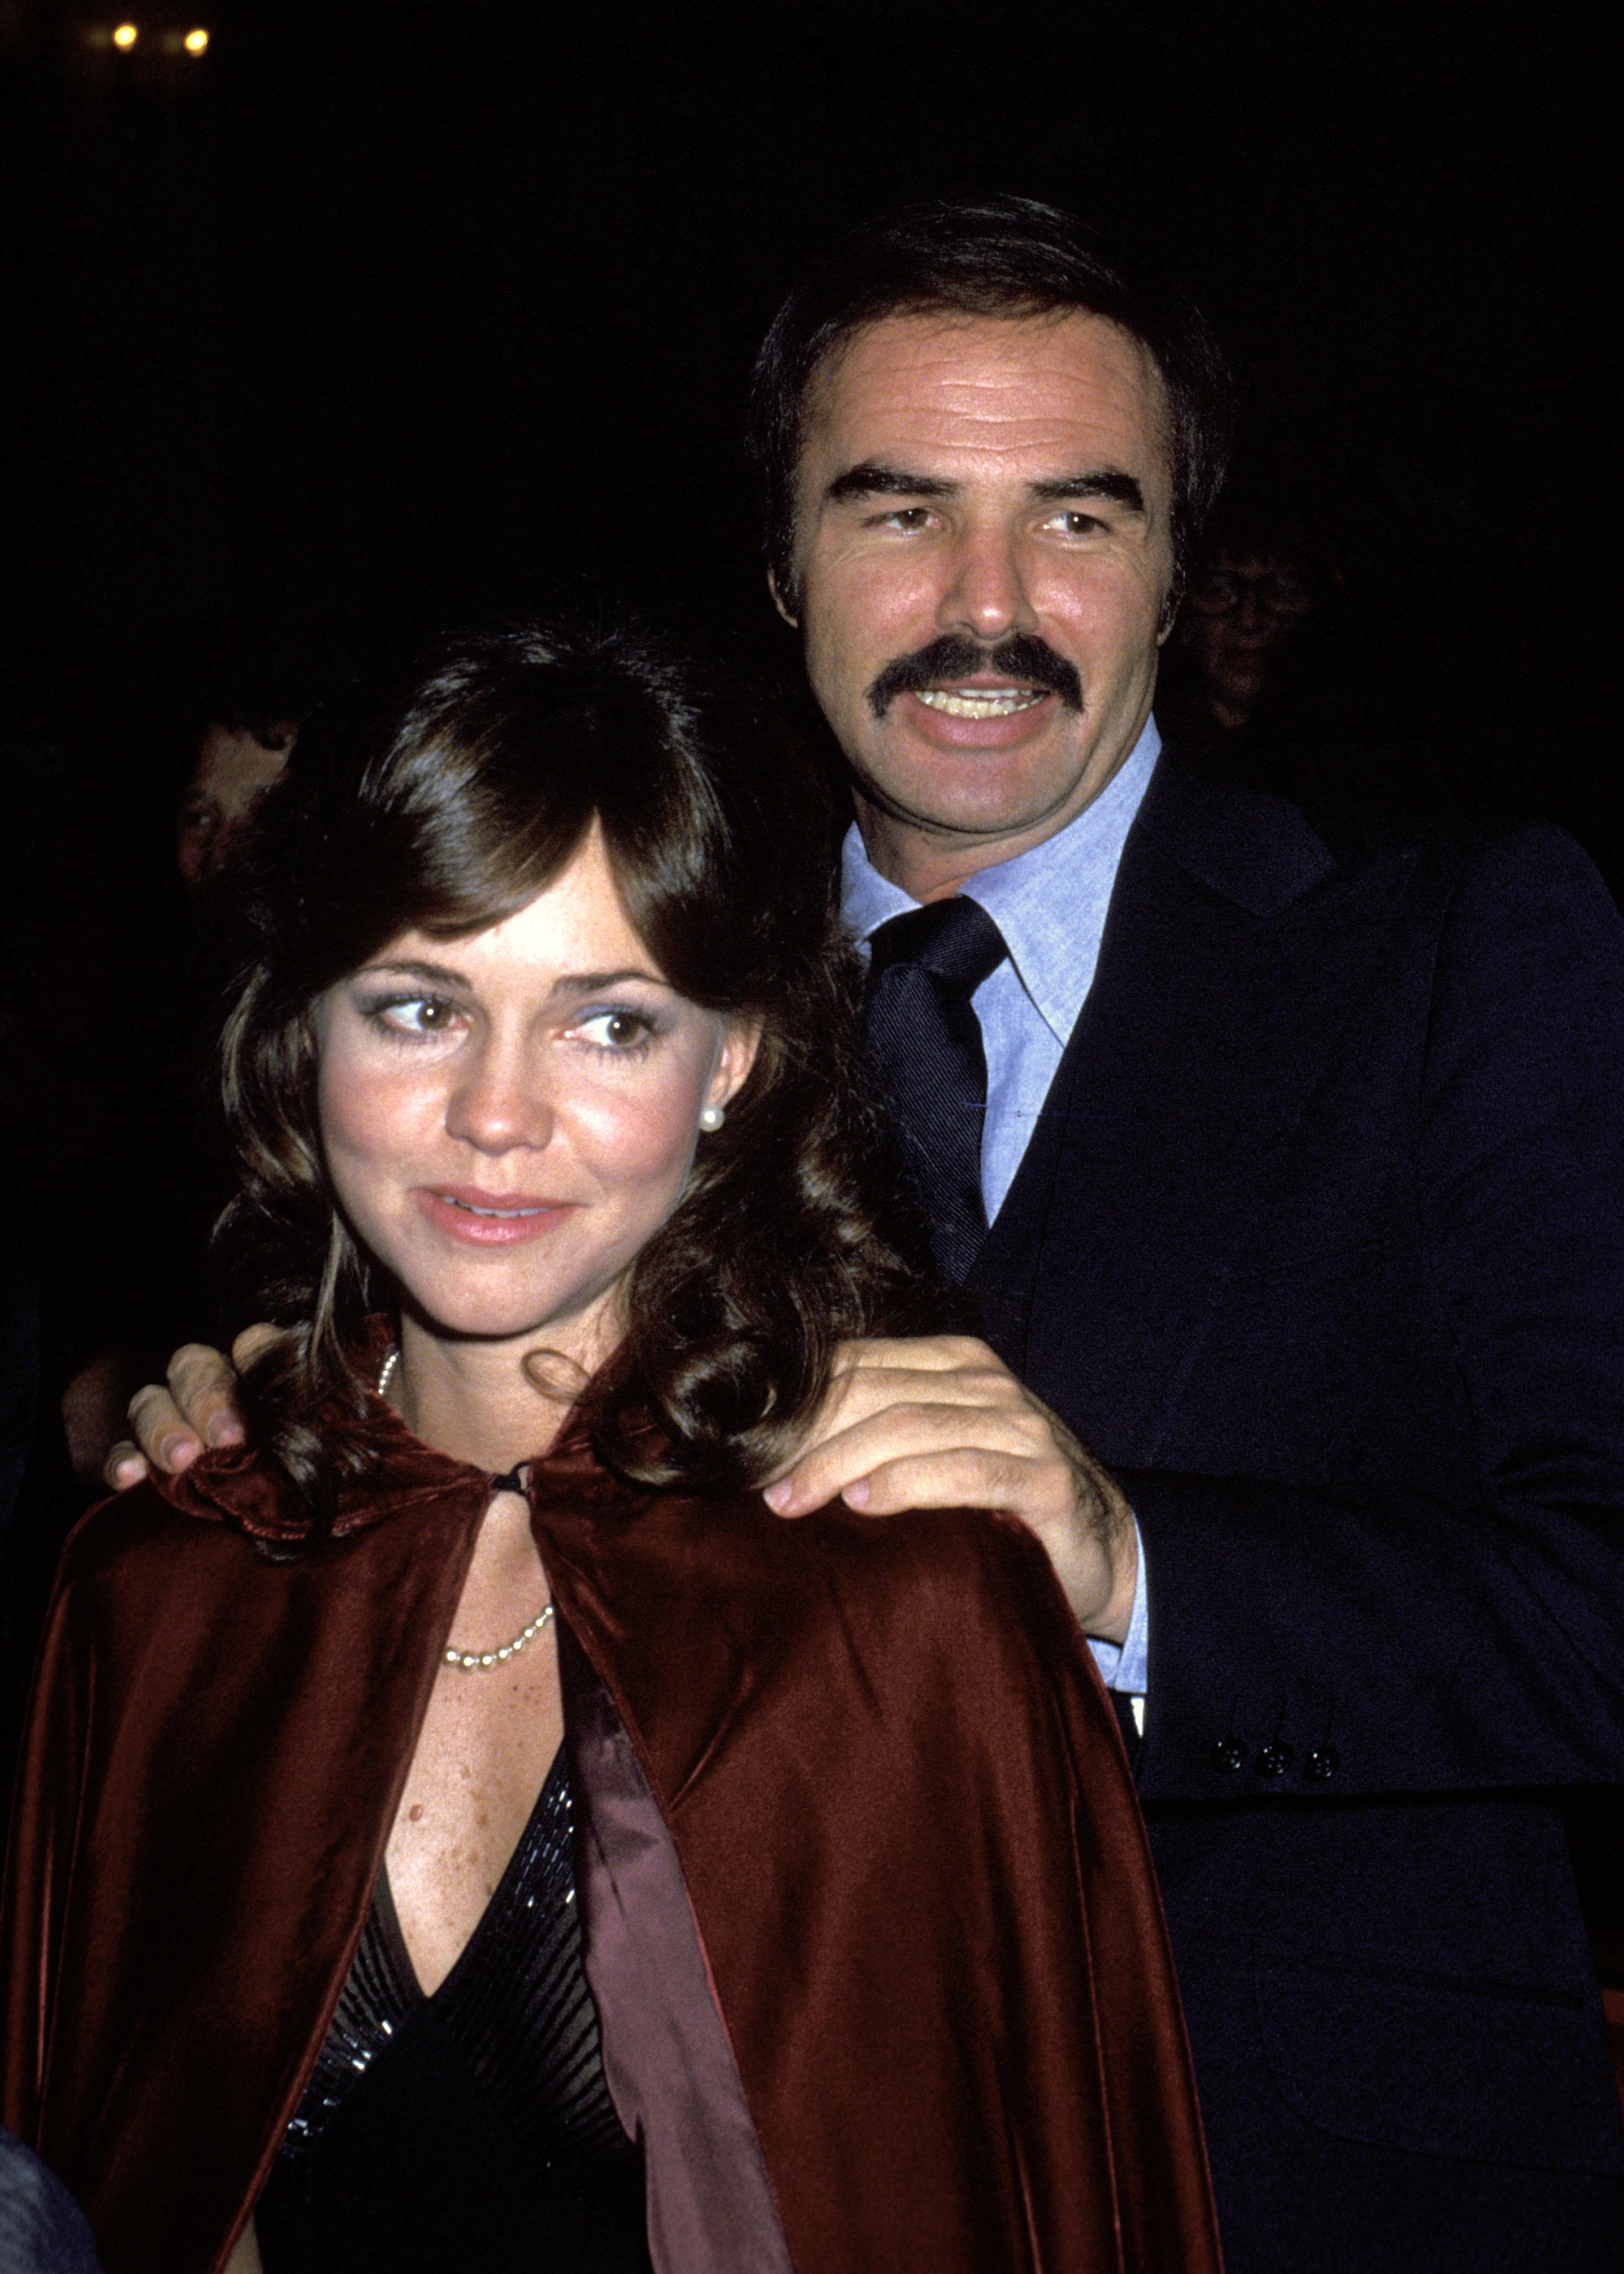 Sally Field and Burt Reynolds at the "Golda" gala on November 5, 1977 ┃Source: Getty Images